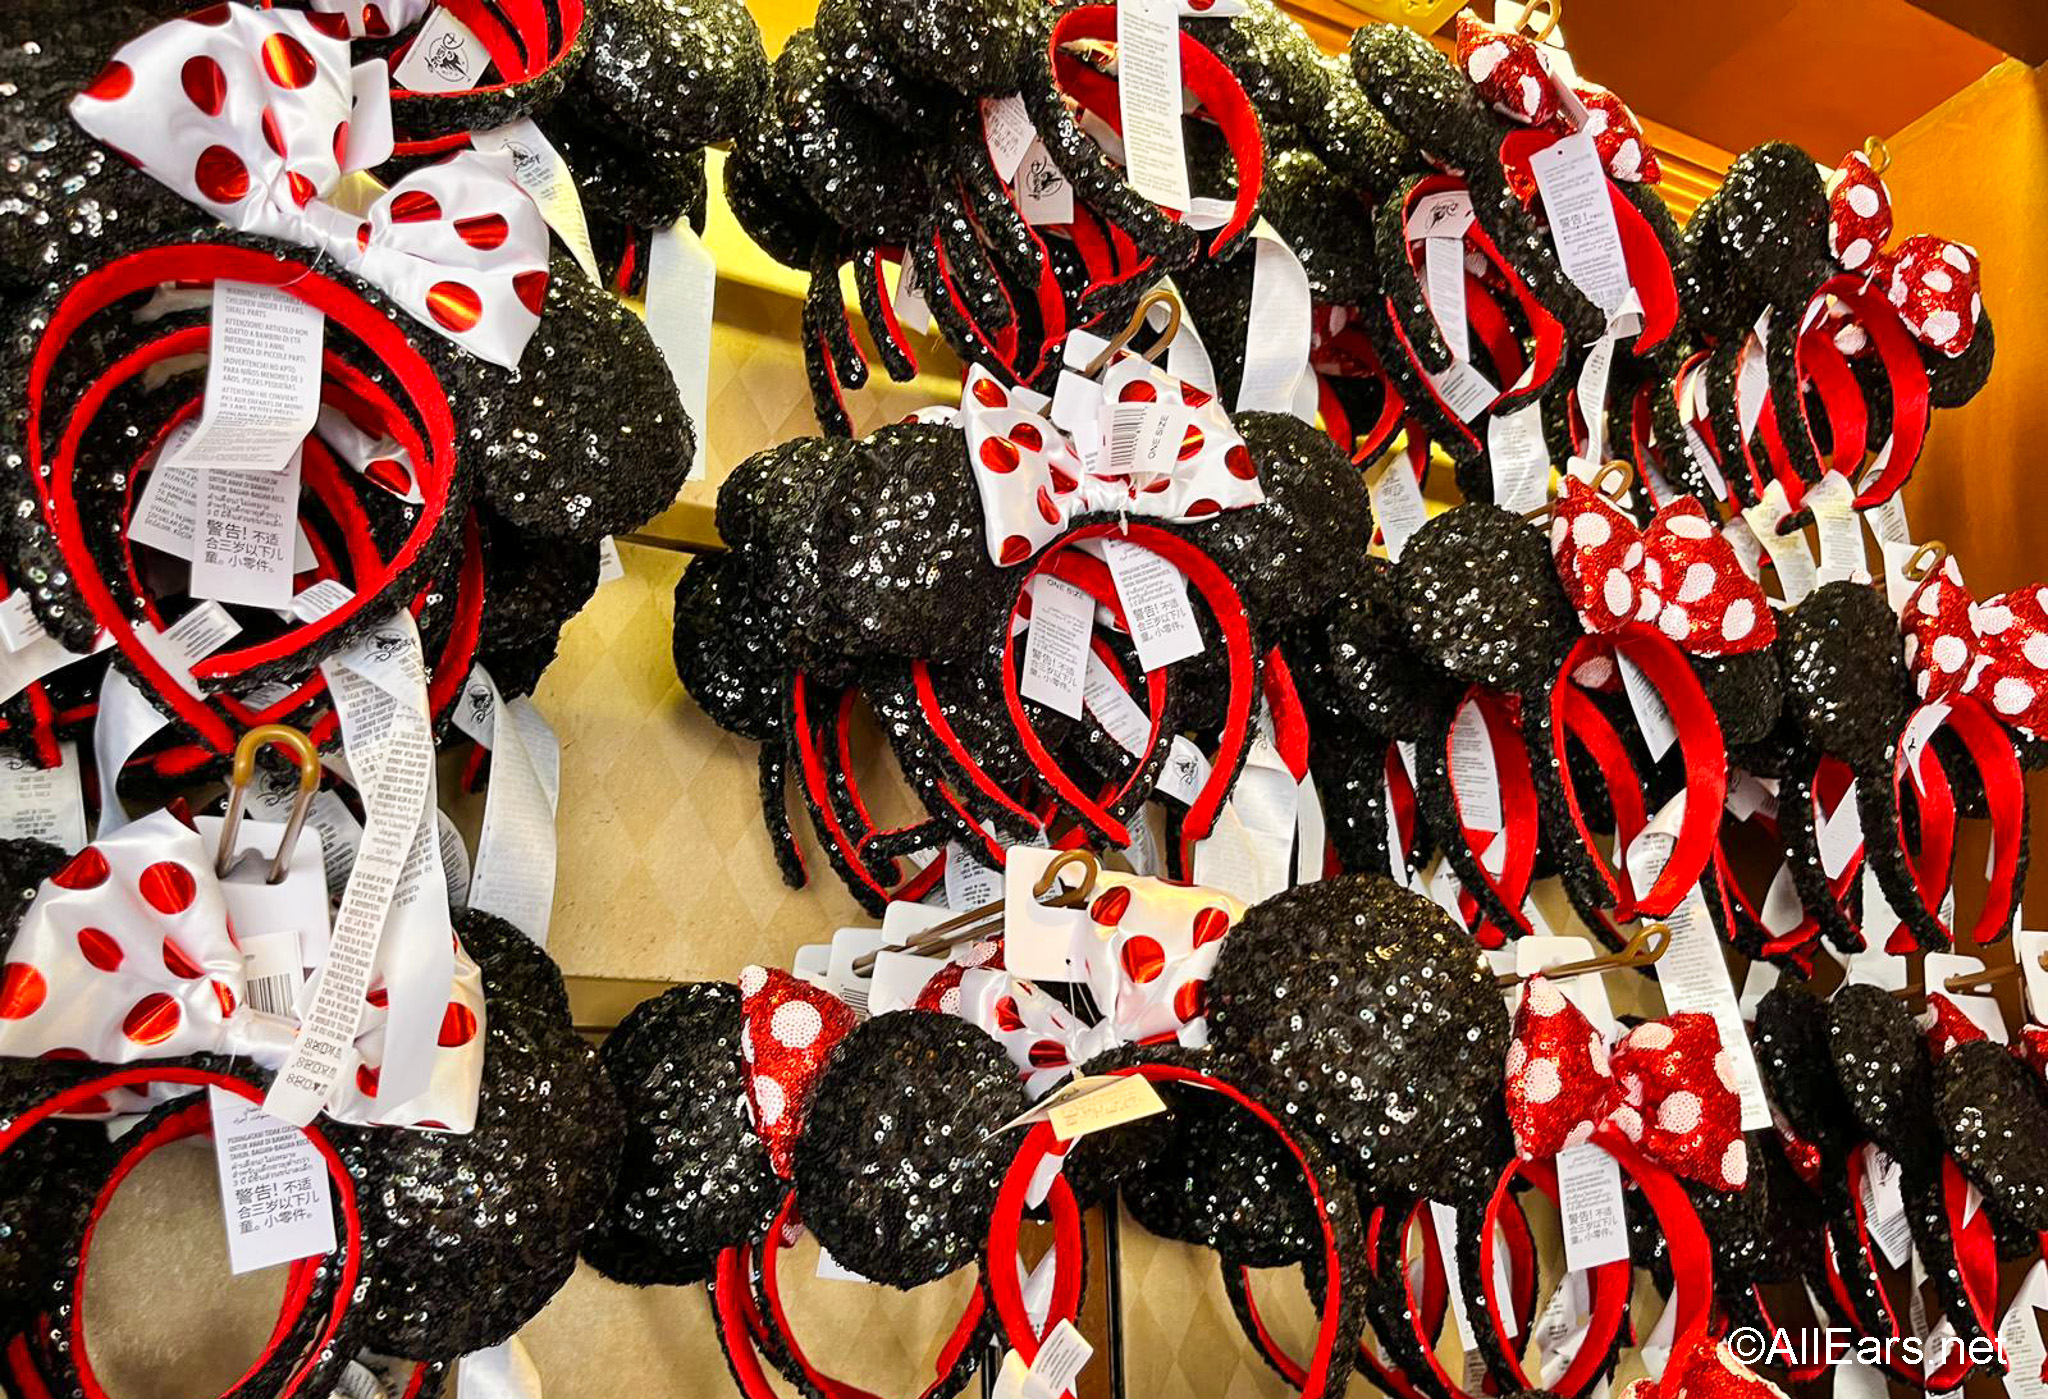 PHOTOS: The Minnie Ears Stoney Clover Lane Fans Can't Miss in Disney World  